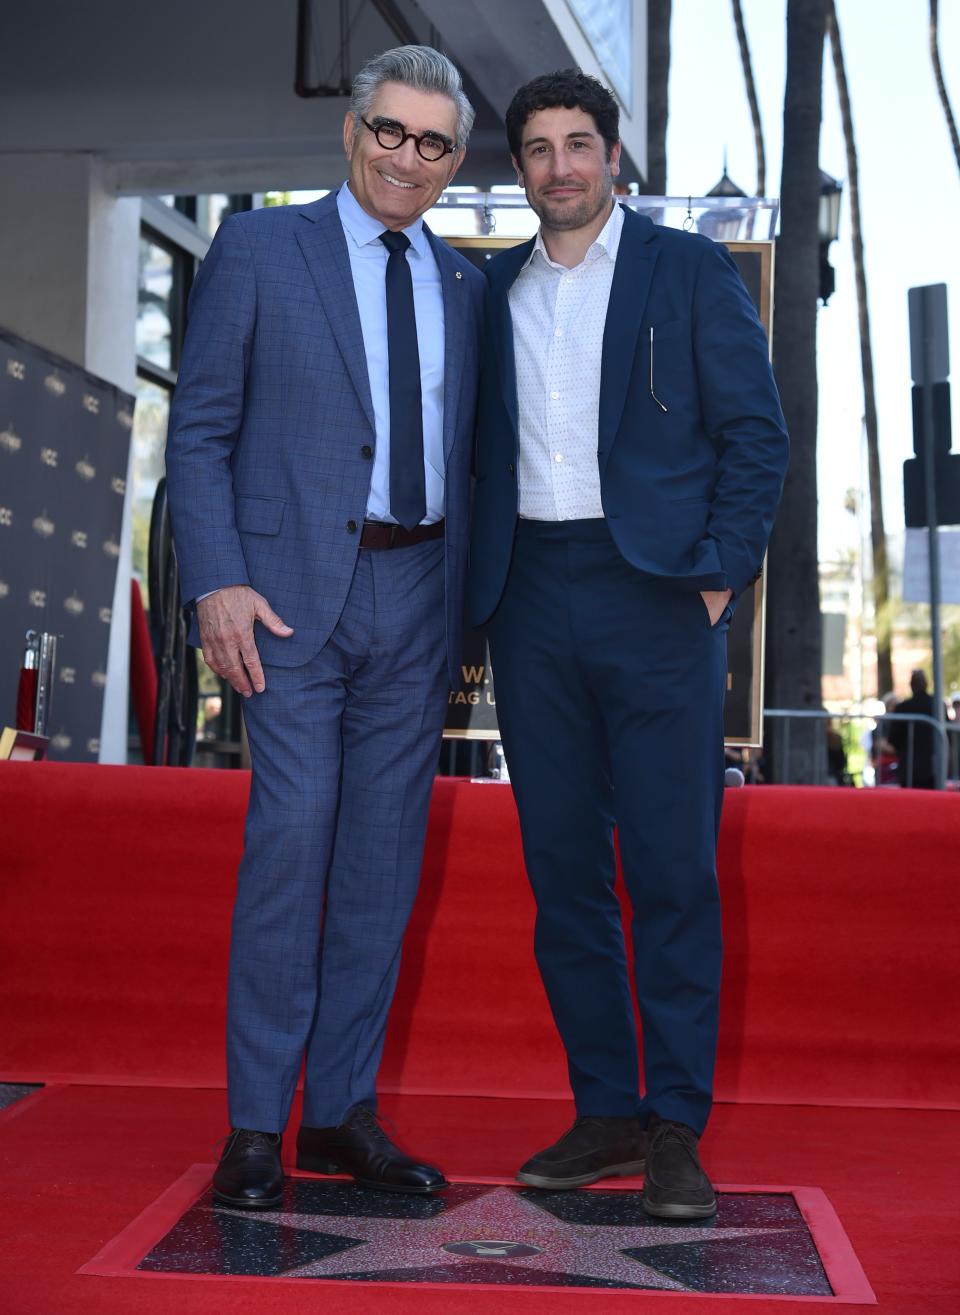 Eugene Levy poses with his "American Pie" son Jason Biggs at his Walk of Fame ceremony.